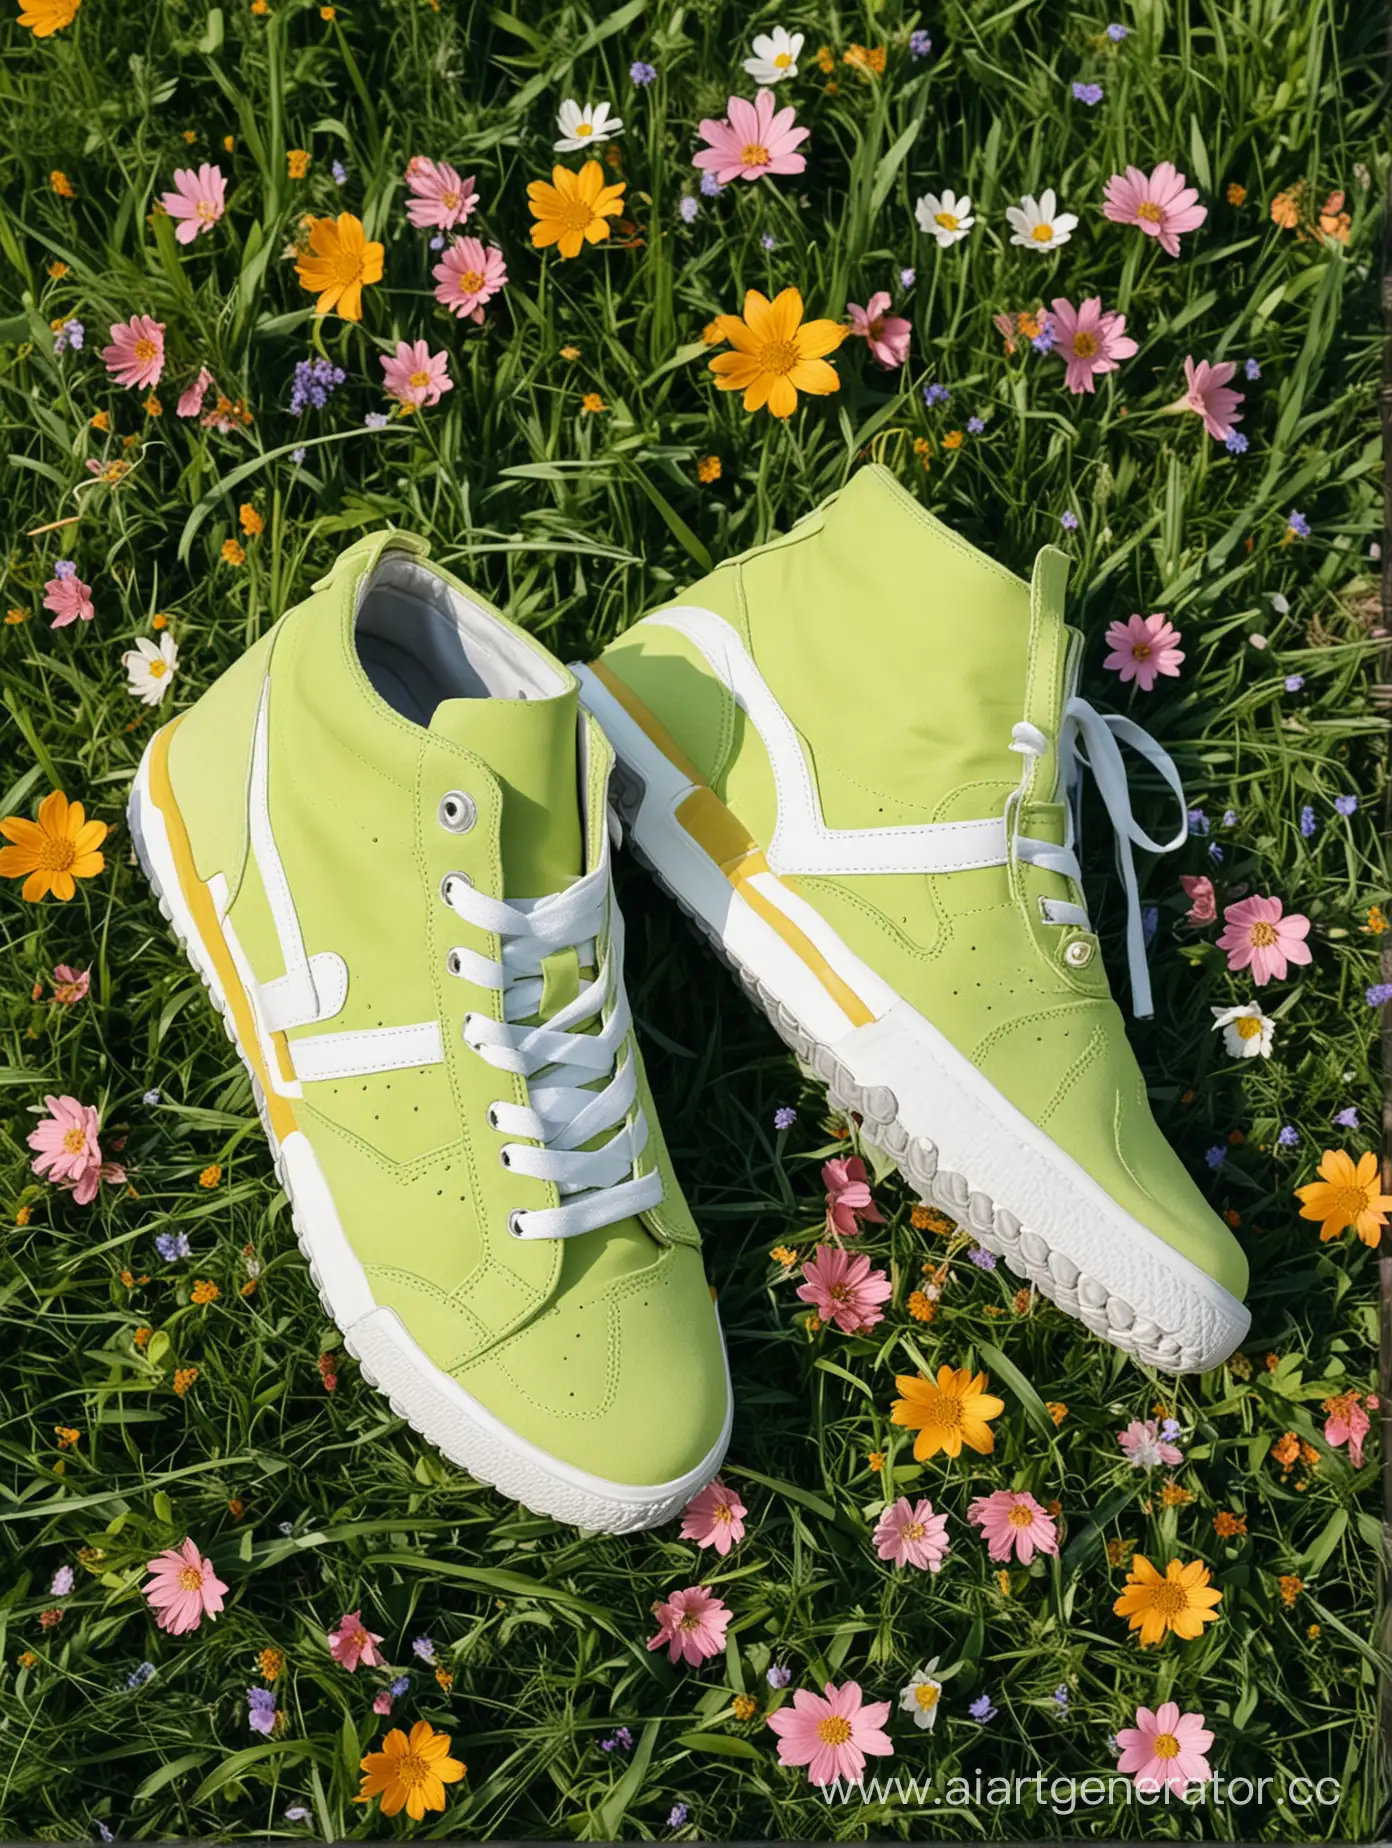 Colorful-Sneakers-Resting-Among-Vibrant-Flowers-in-Lush-Green-Grass